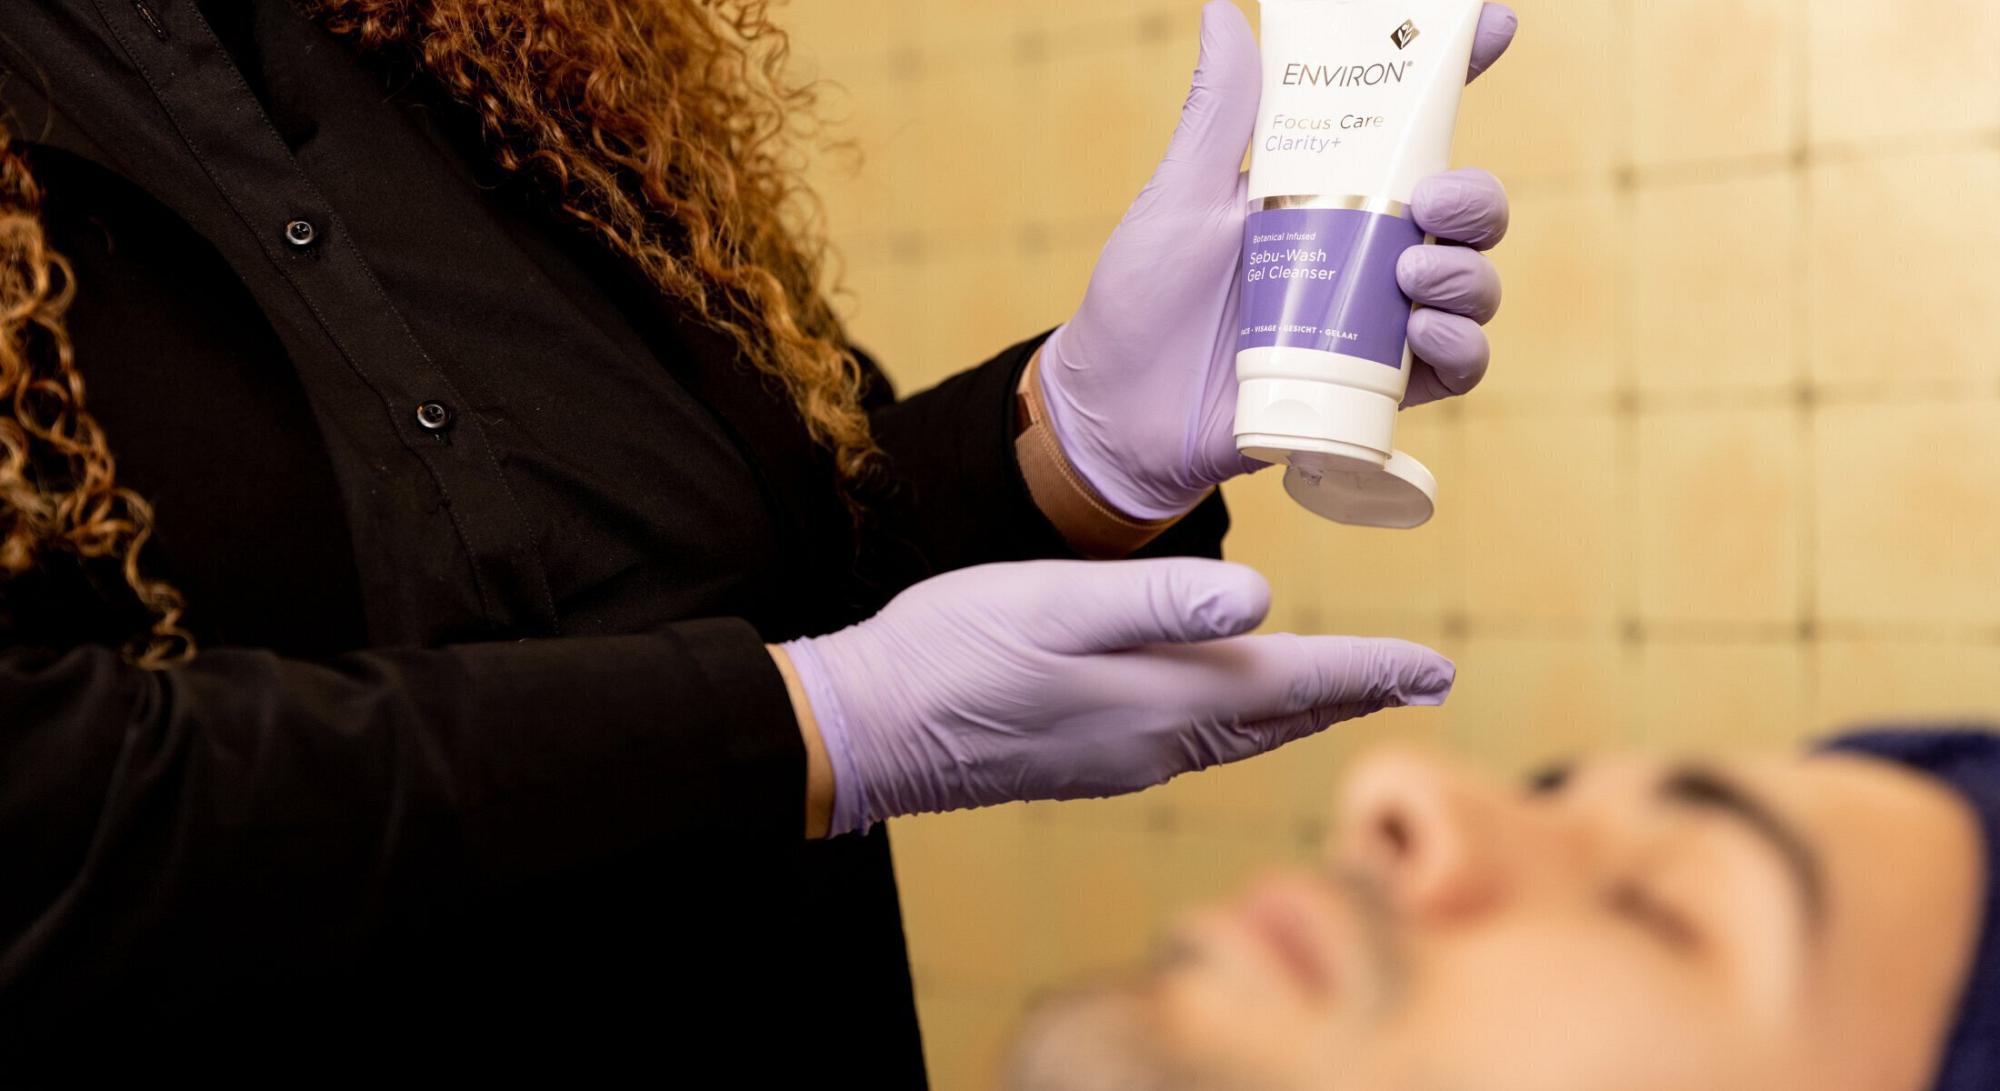 Exclusive Environ Flagship Provider